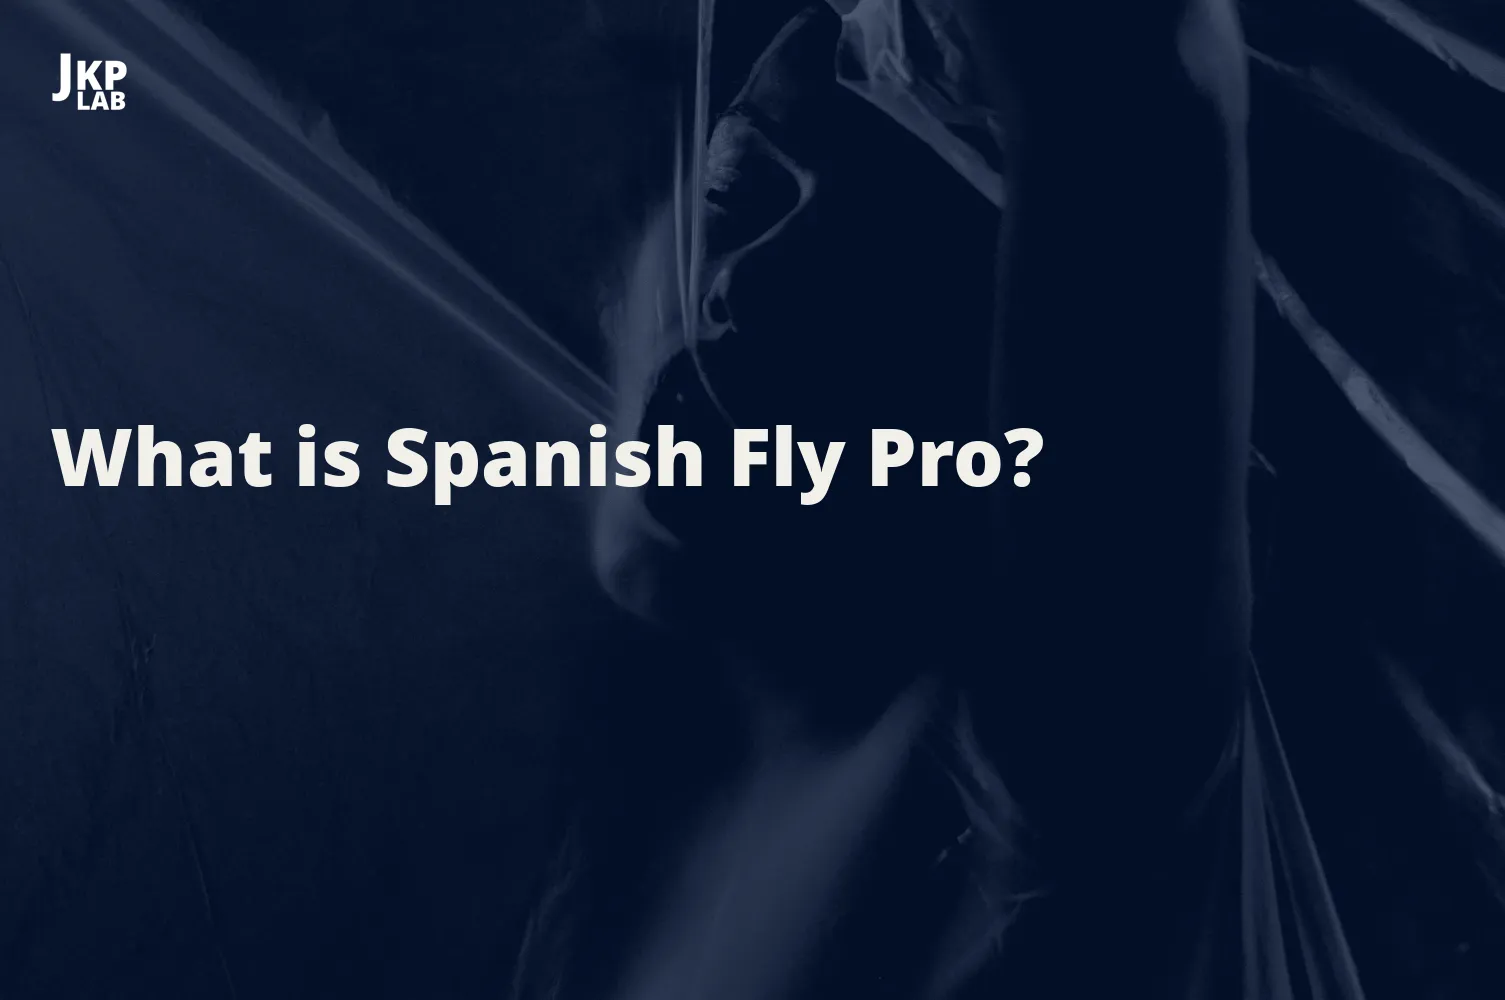 Addressing Common Concerns about Spanish Fly